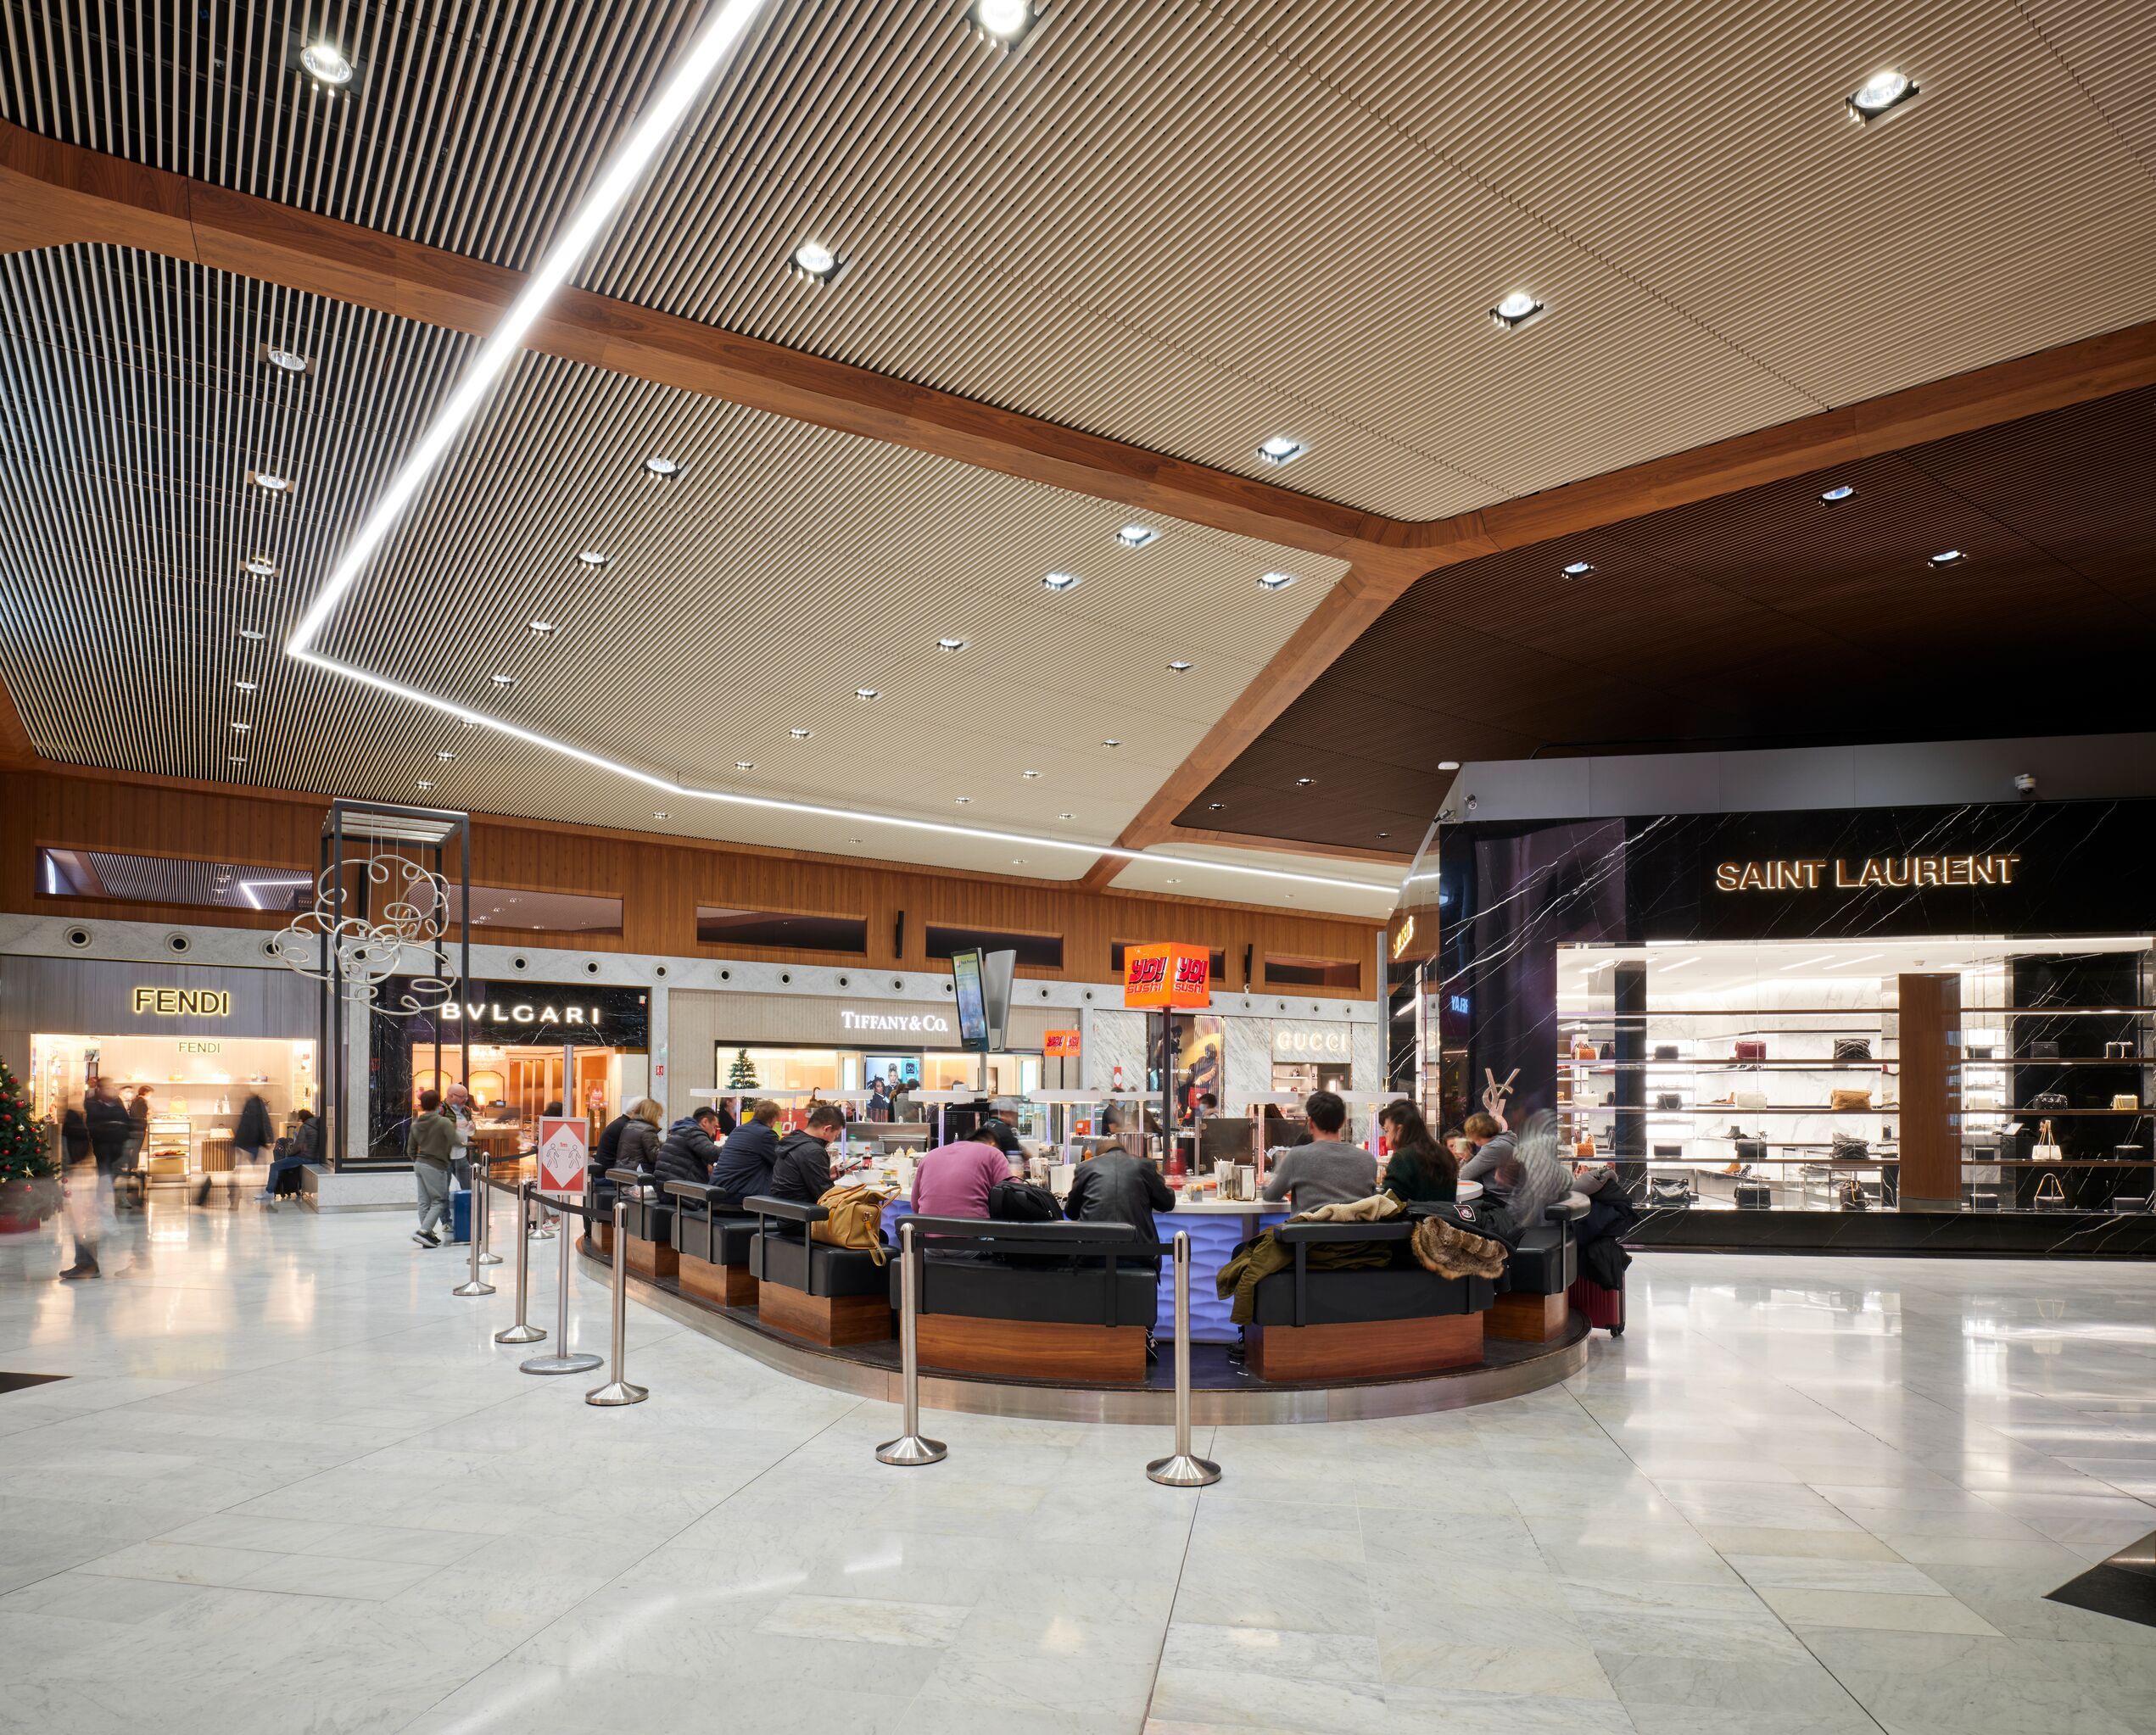 Paris-Charles De Gaulle Airport: high-quality wood ceilings and cladding  for the renovation of several halls